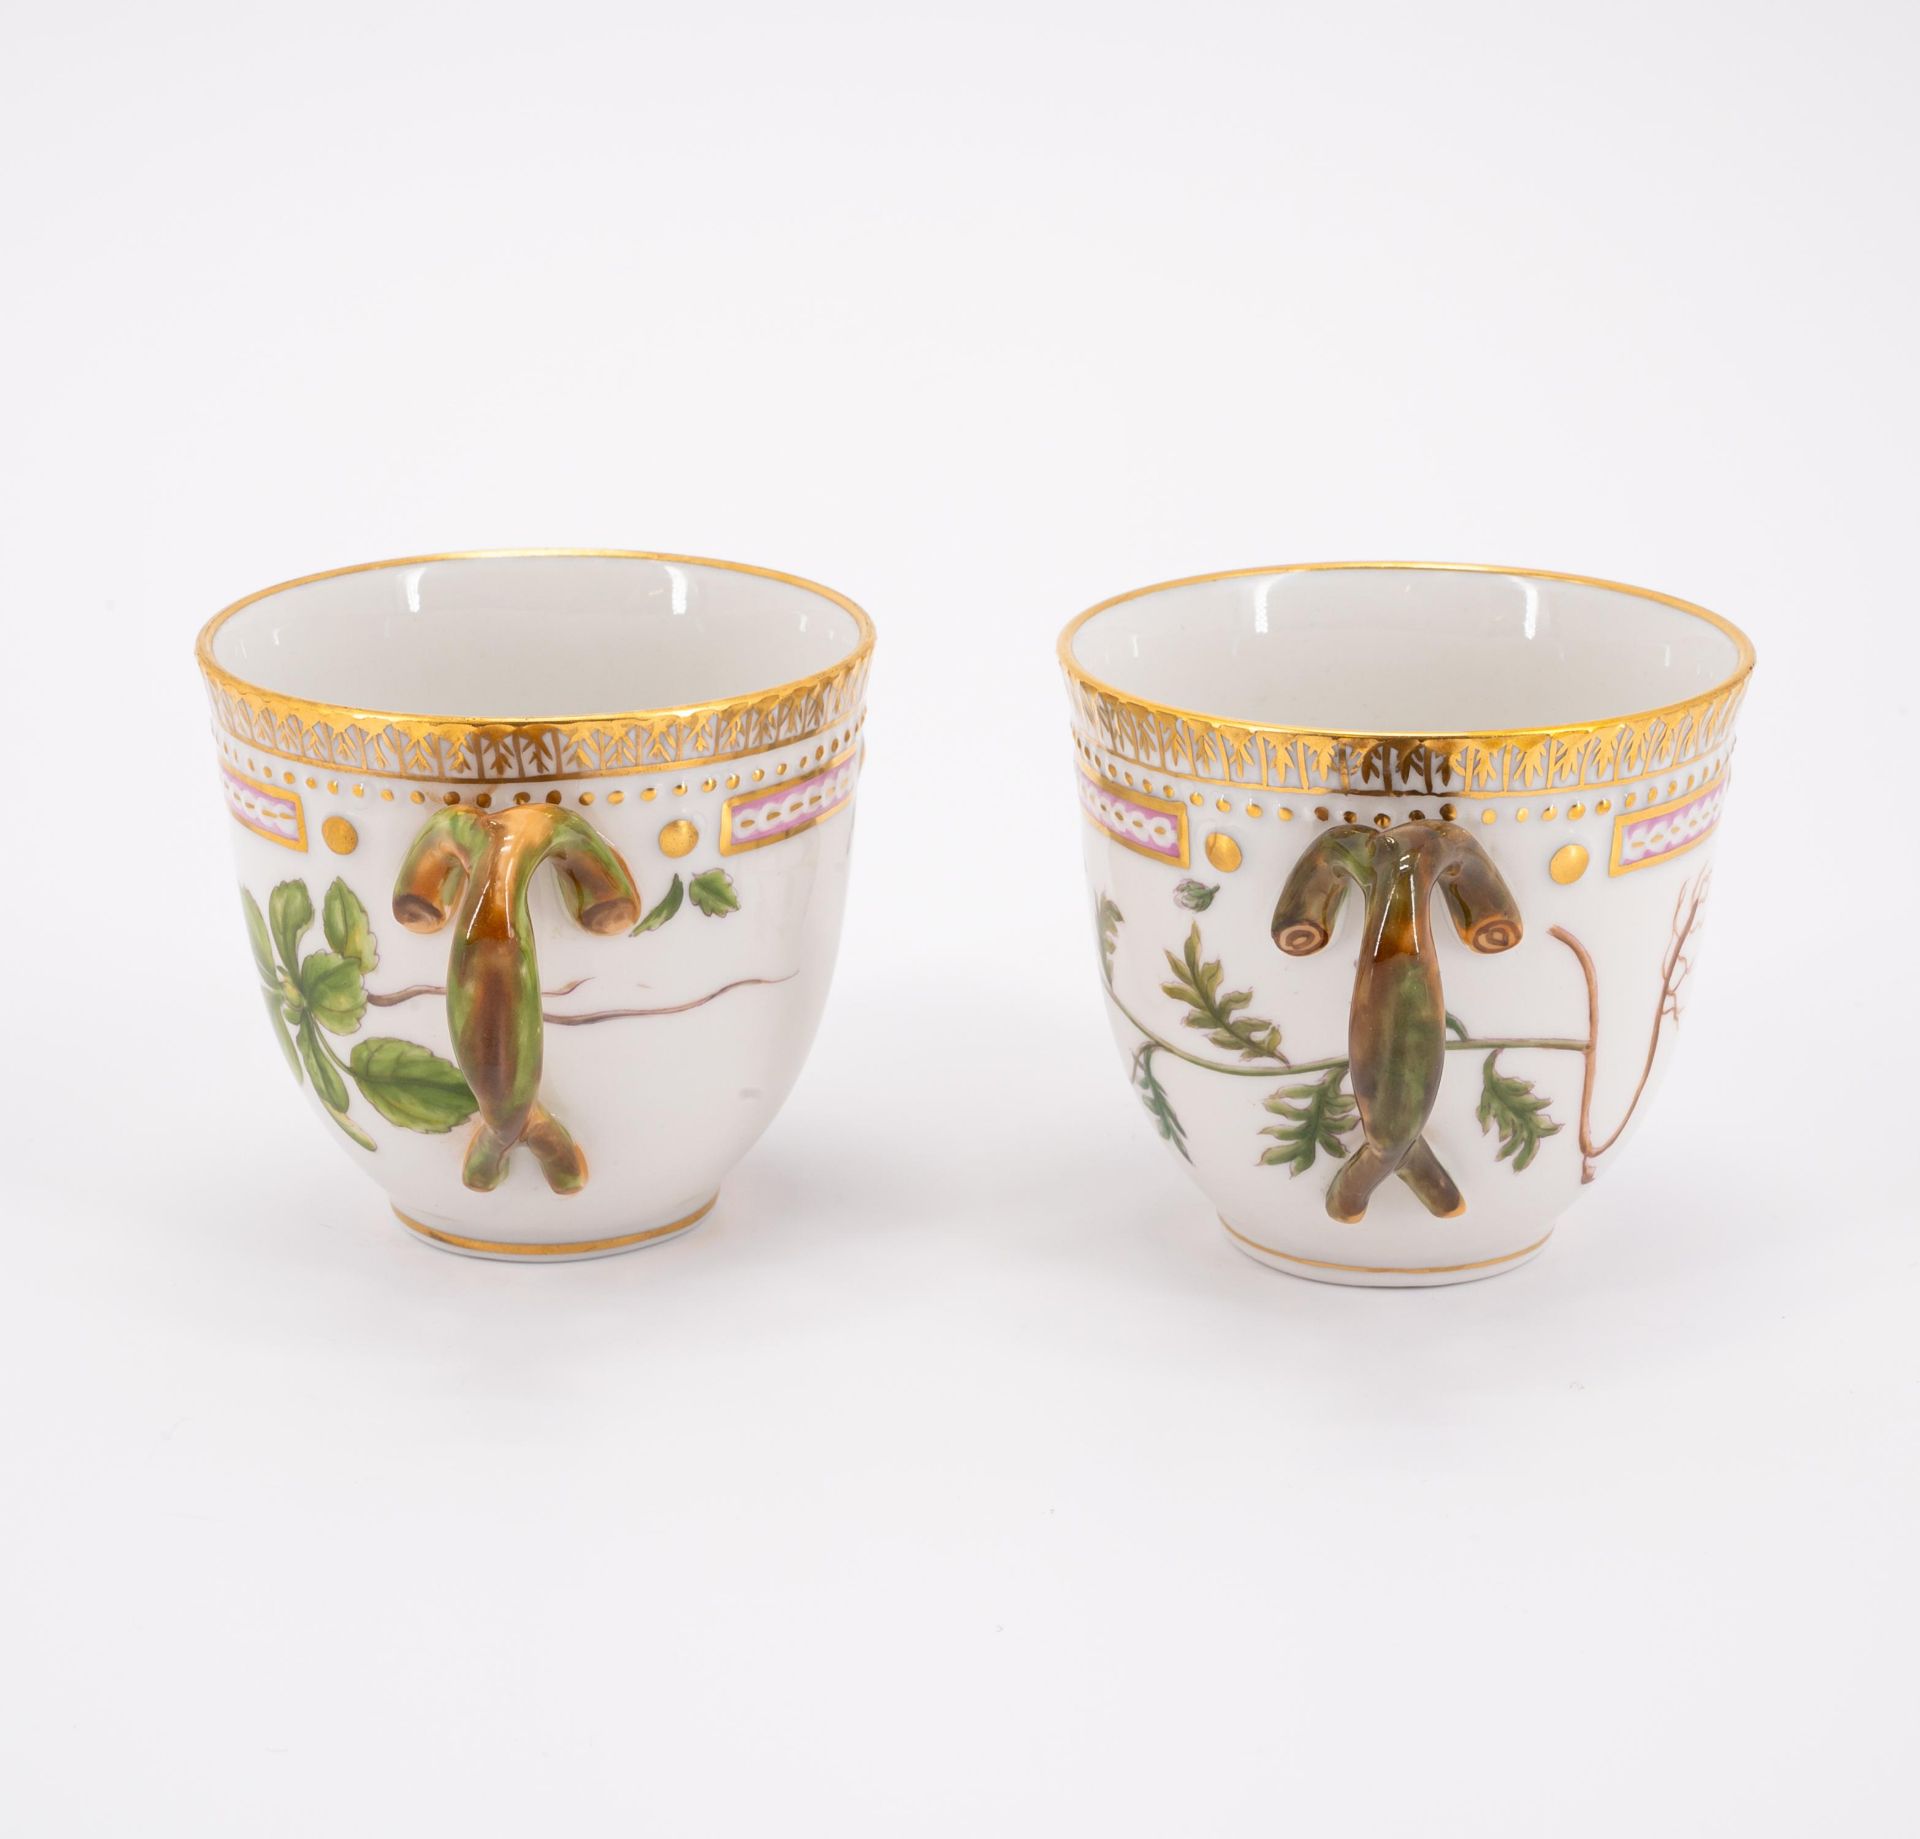 Royal Copenhagen: 95 PIECES FROM A 'FLORA DANICA' DINING SERVICE - Image 2 of 26